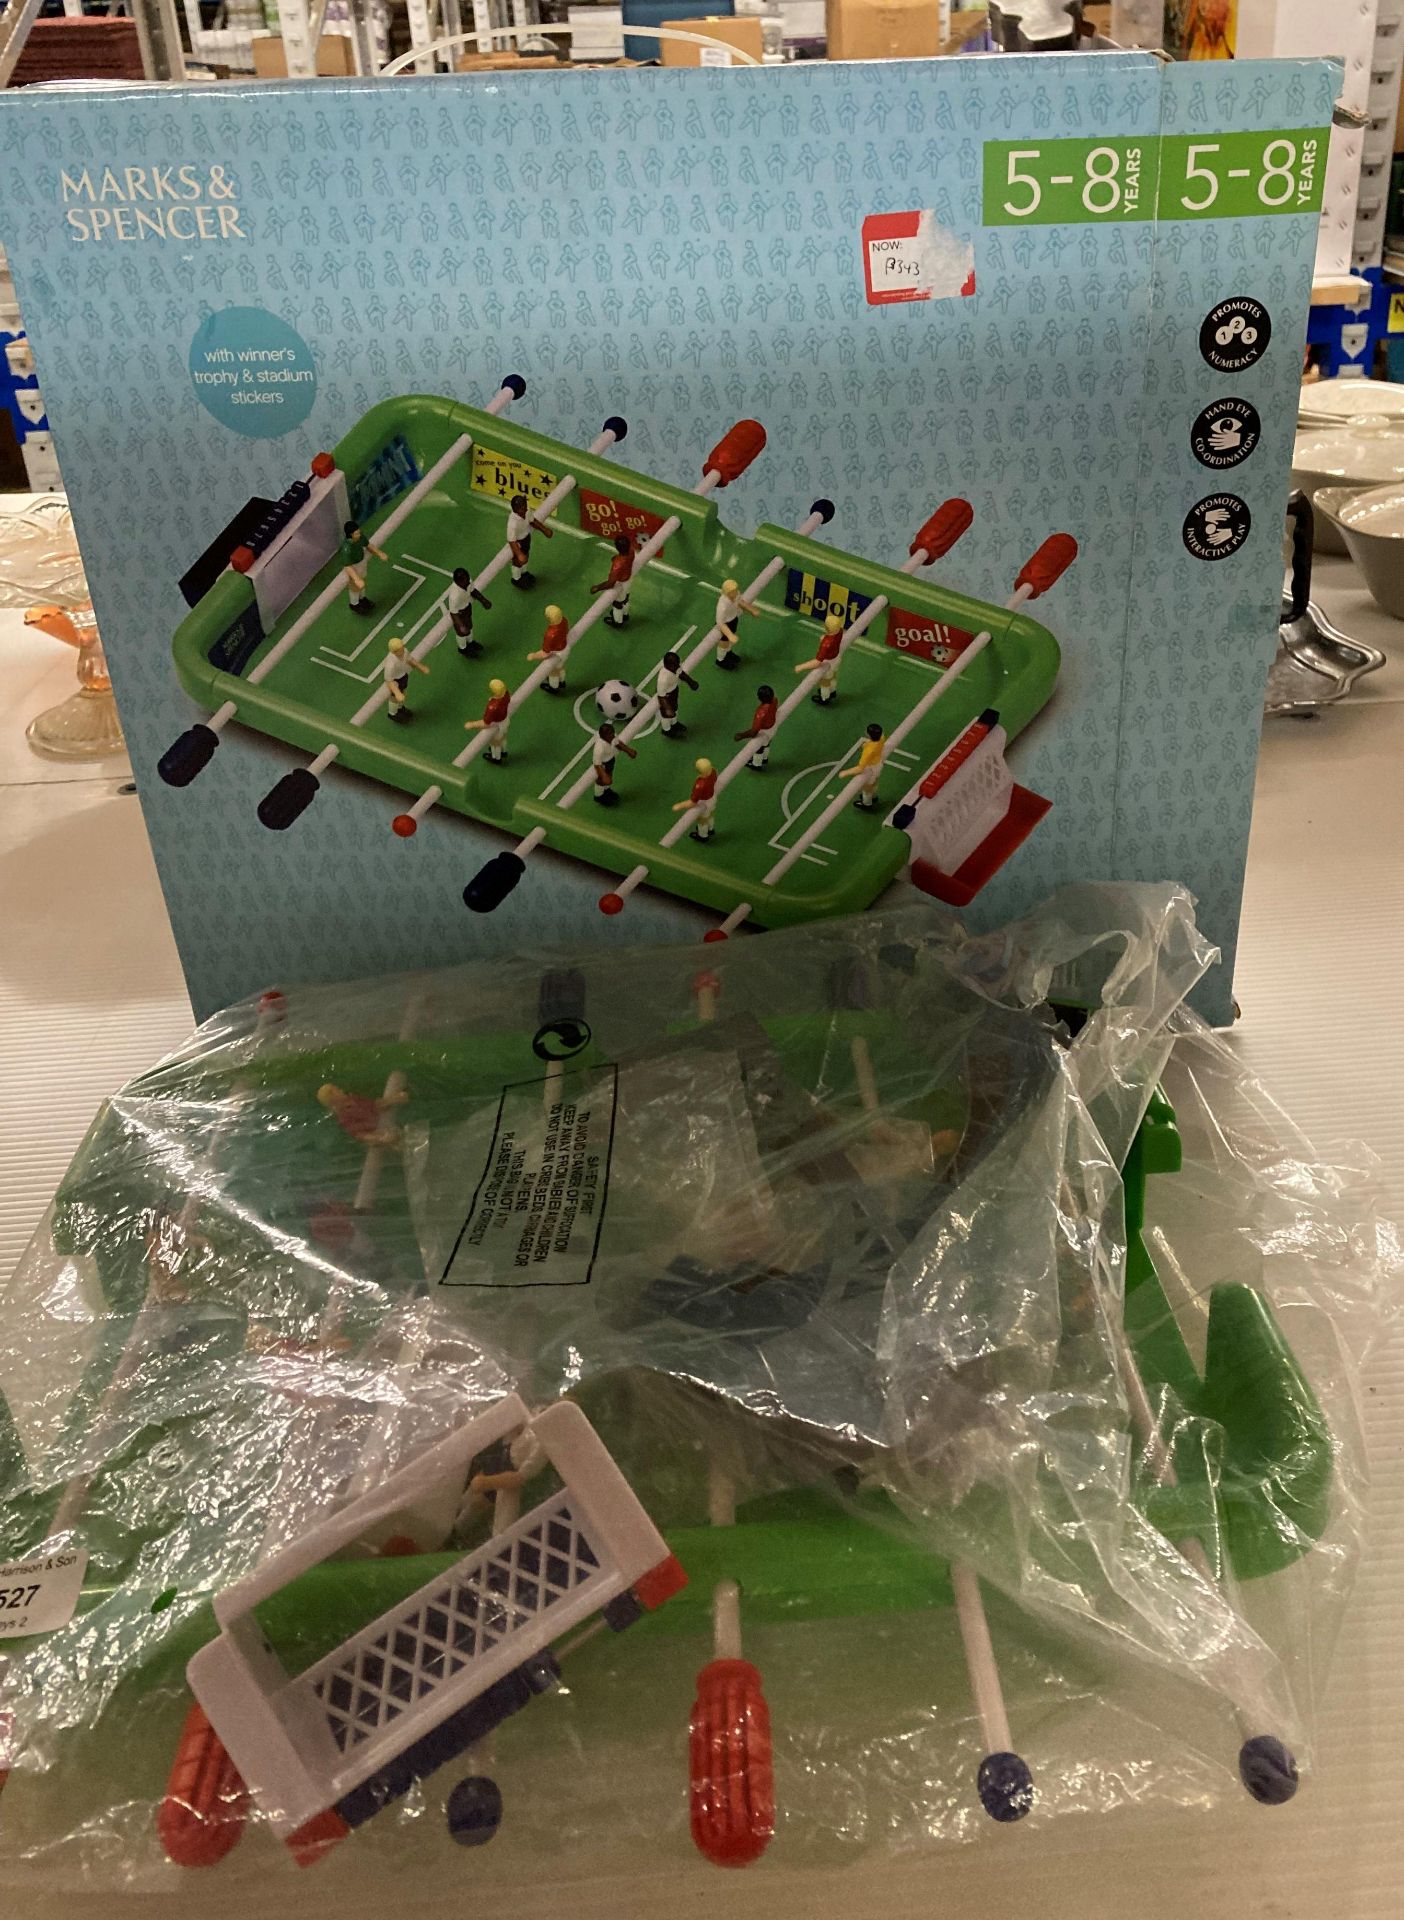 Marks and Spencer's miniature football game years 5-8 in box (R06)